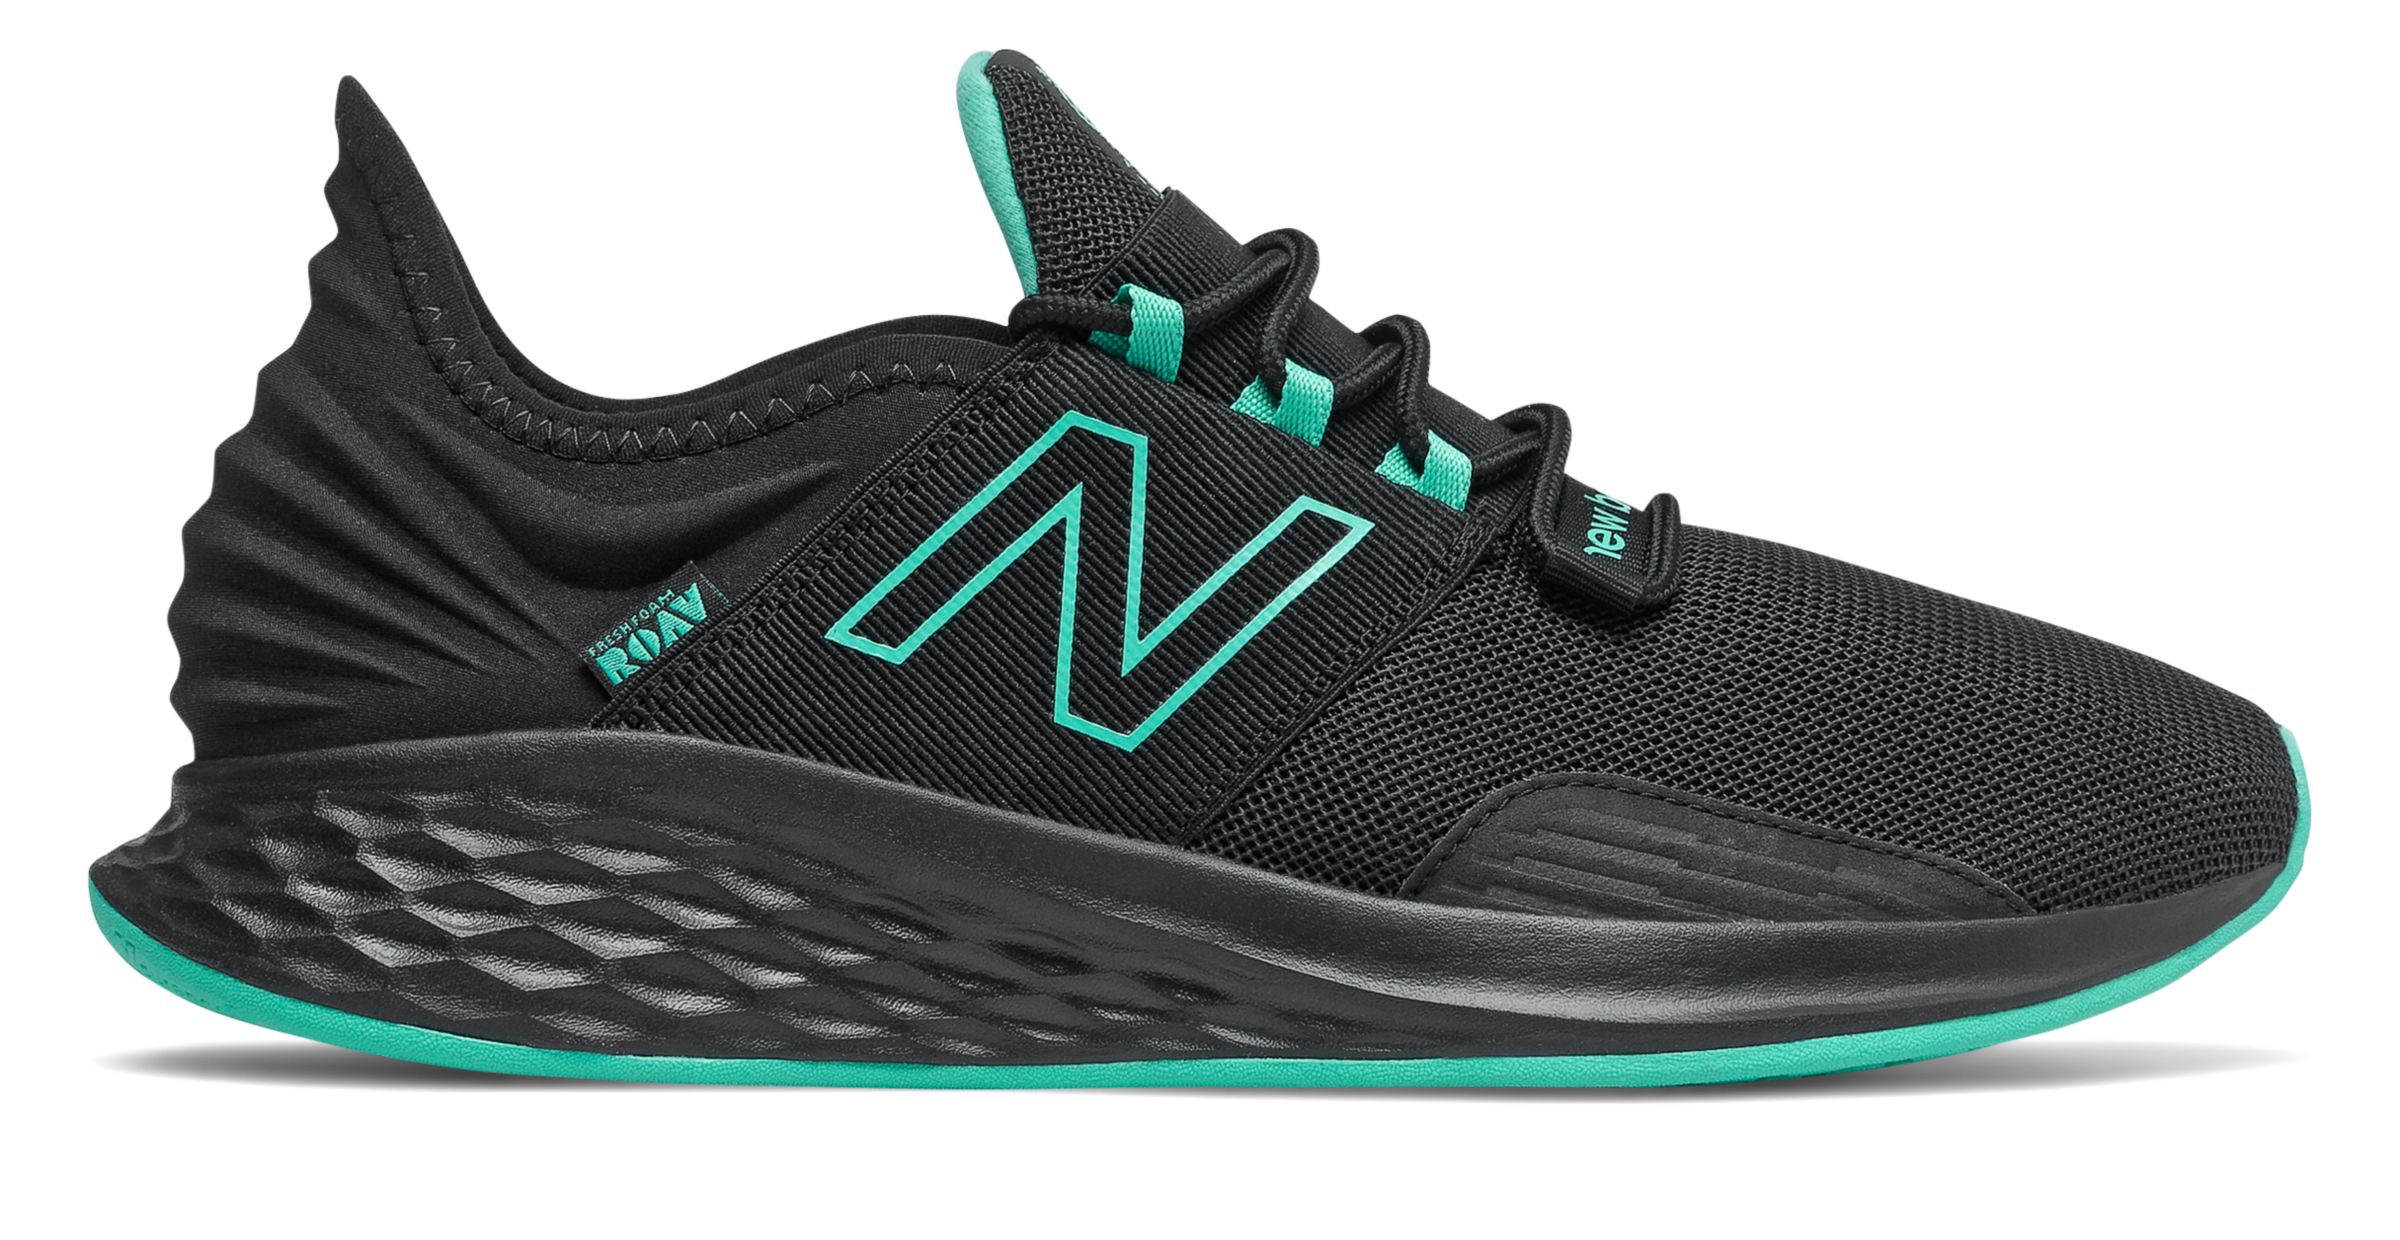 nb liverpool shoes 2019